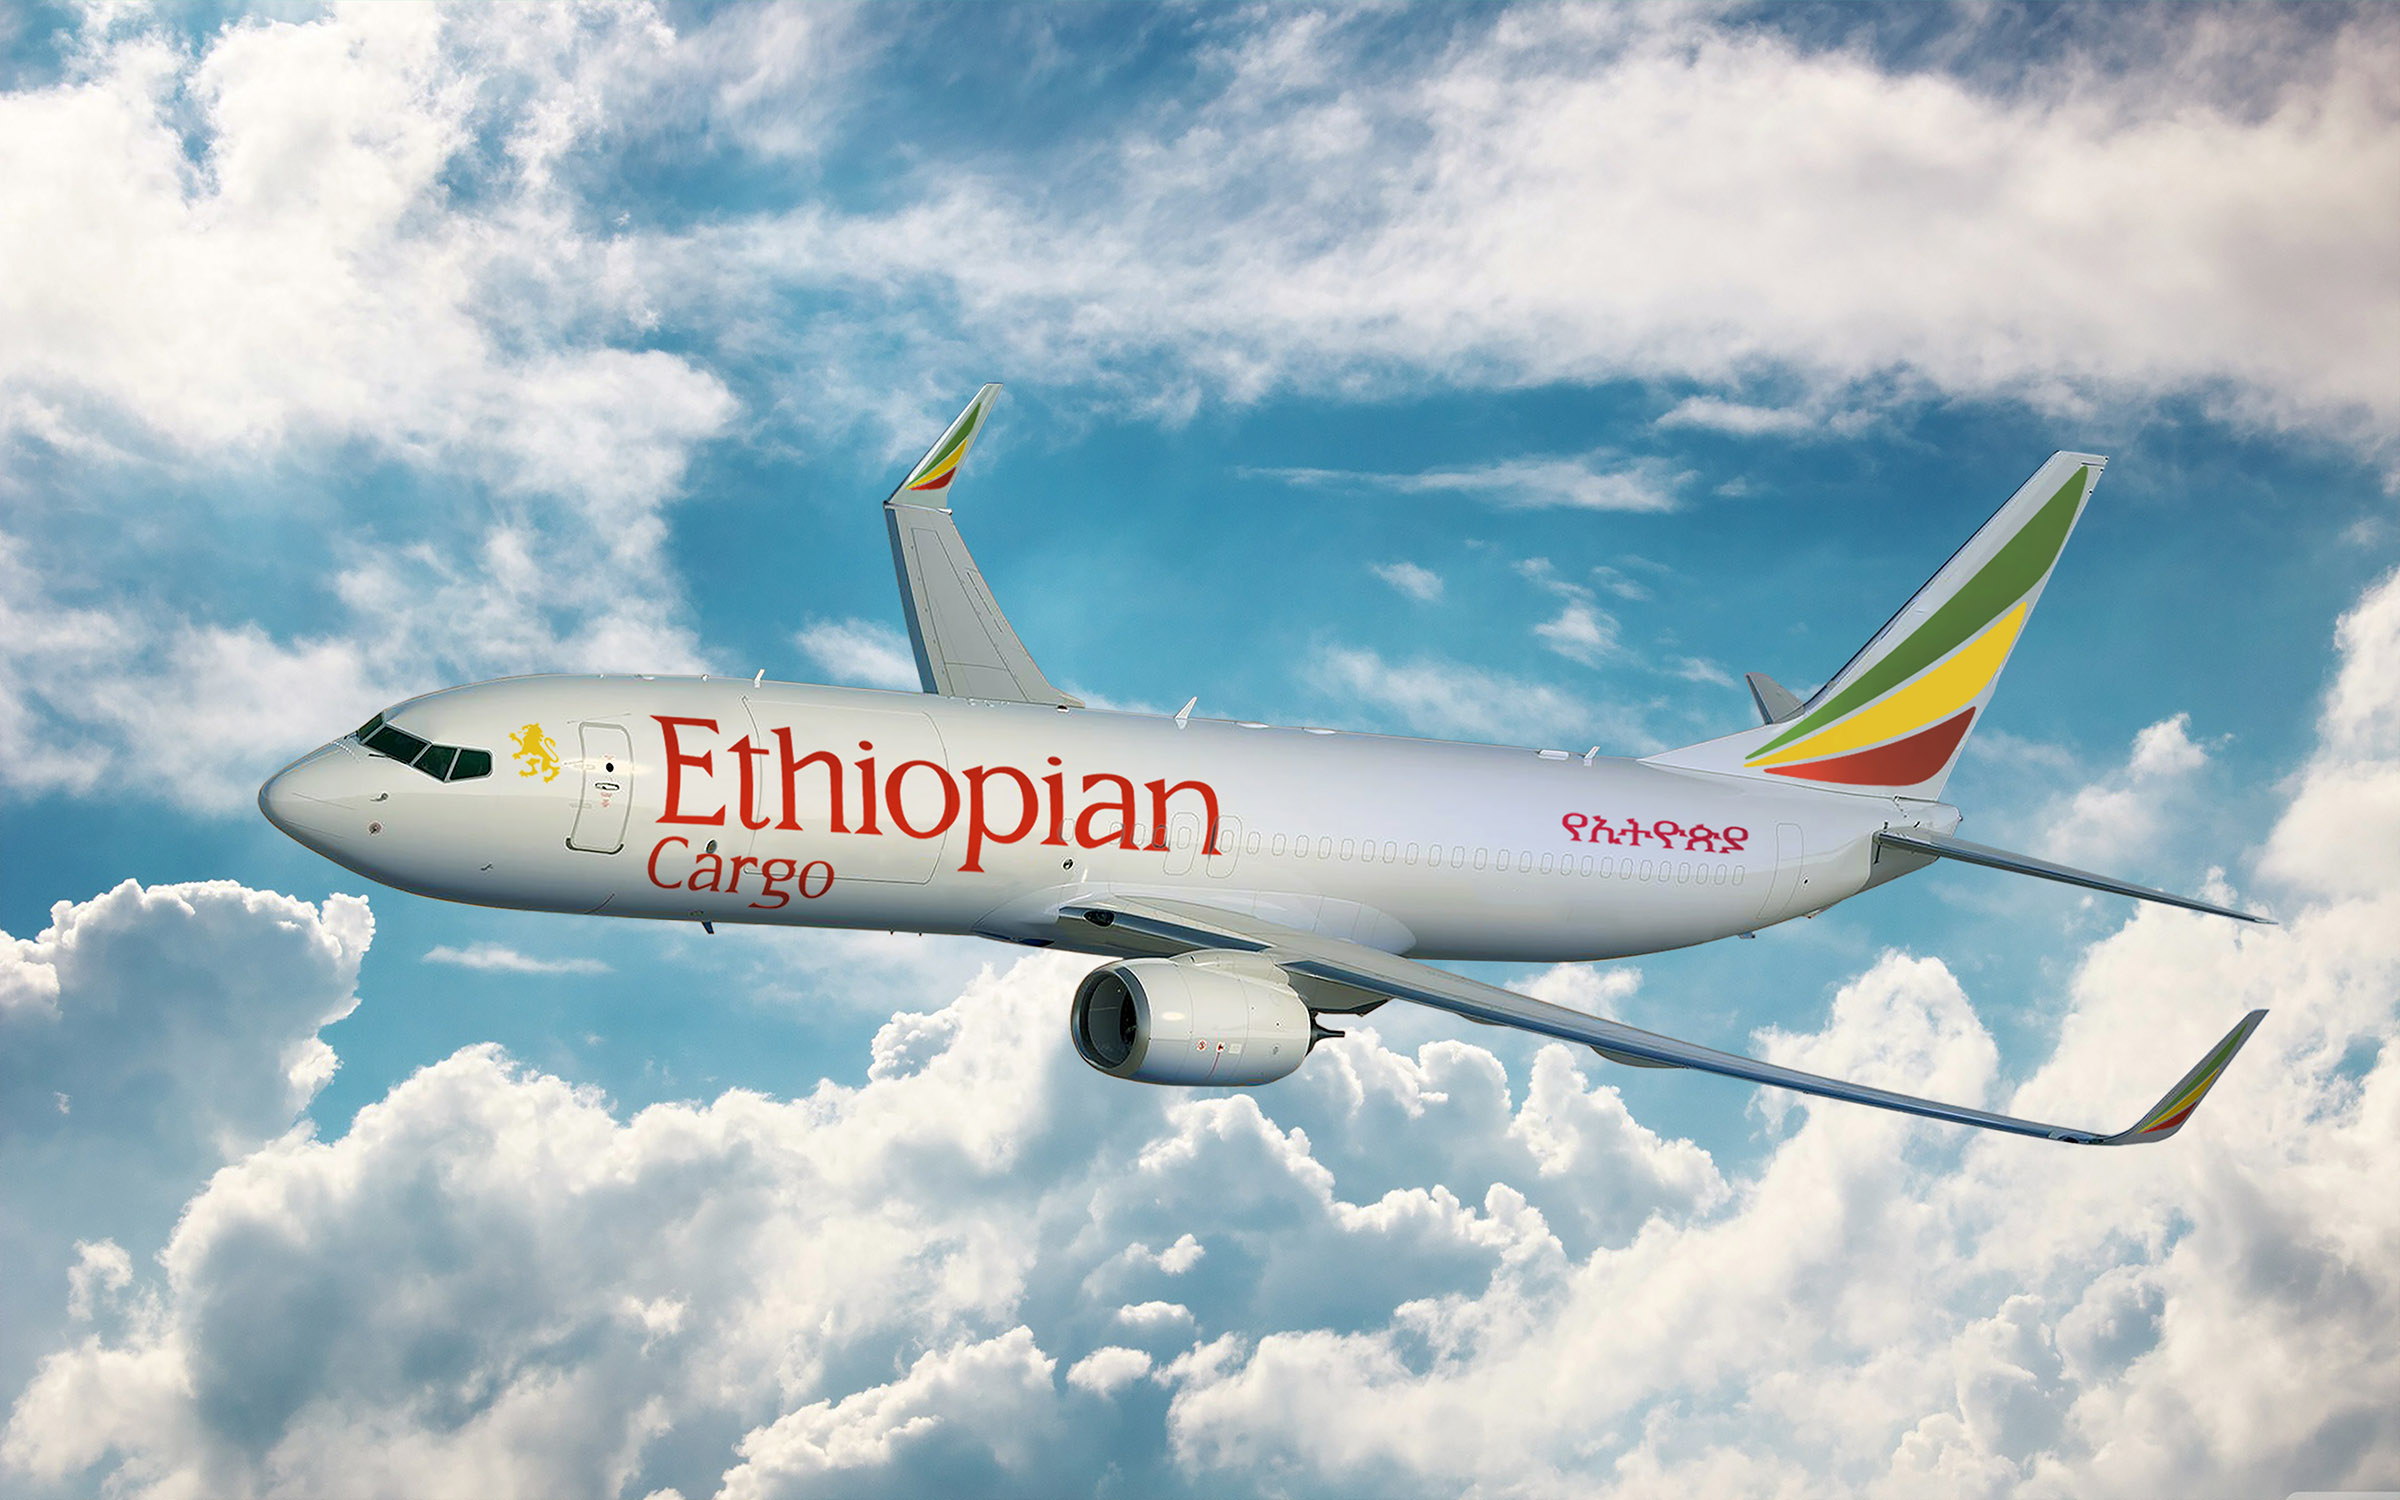 Ethiopian will be the first airline to operate an AEI-converted 737-800SF.